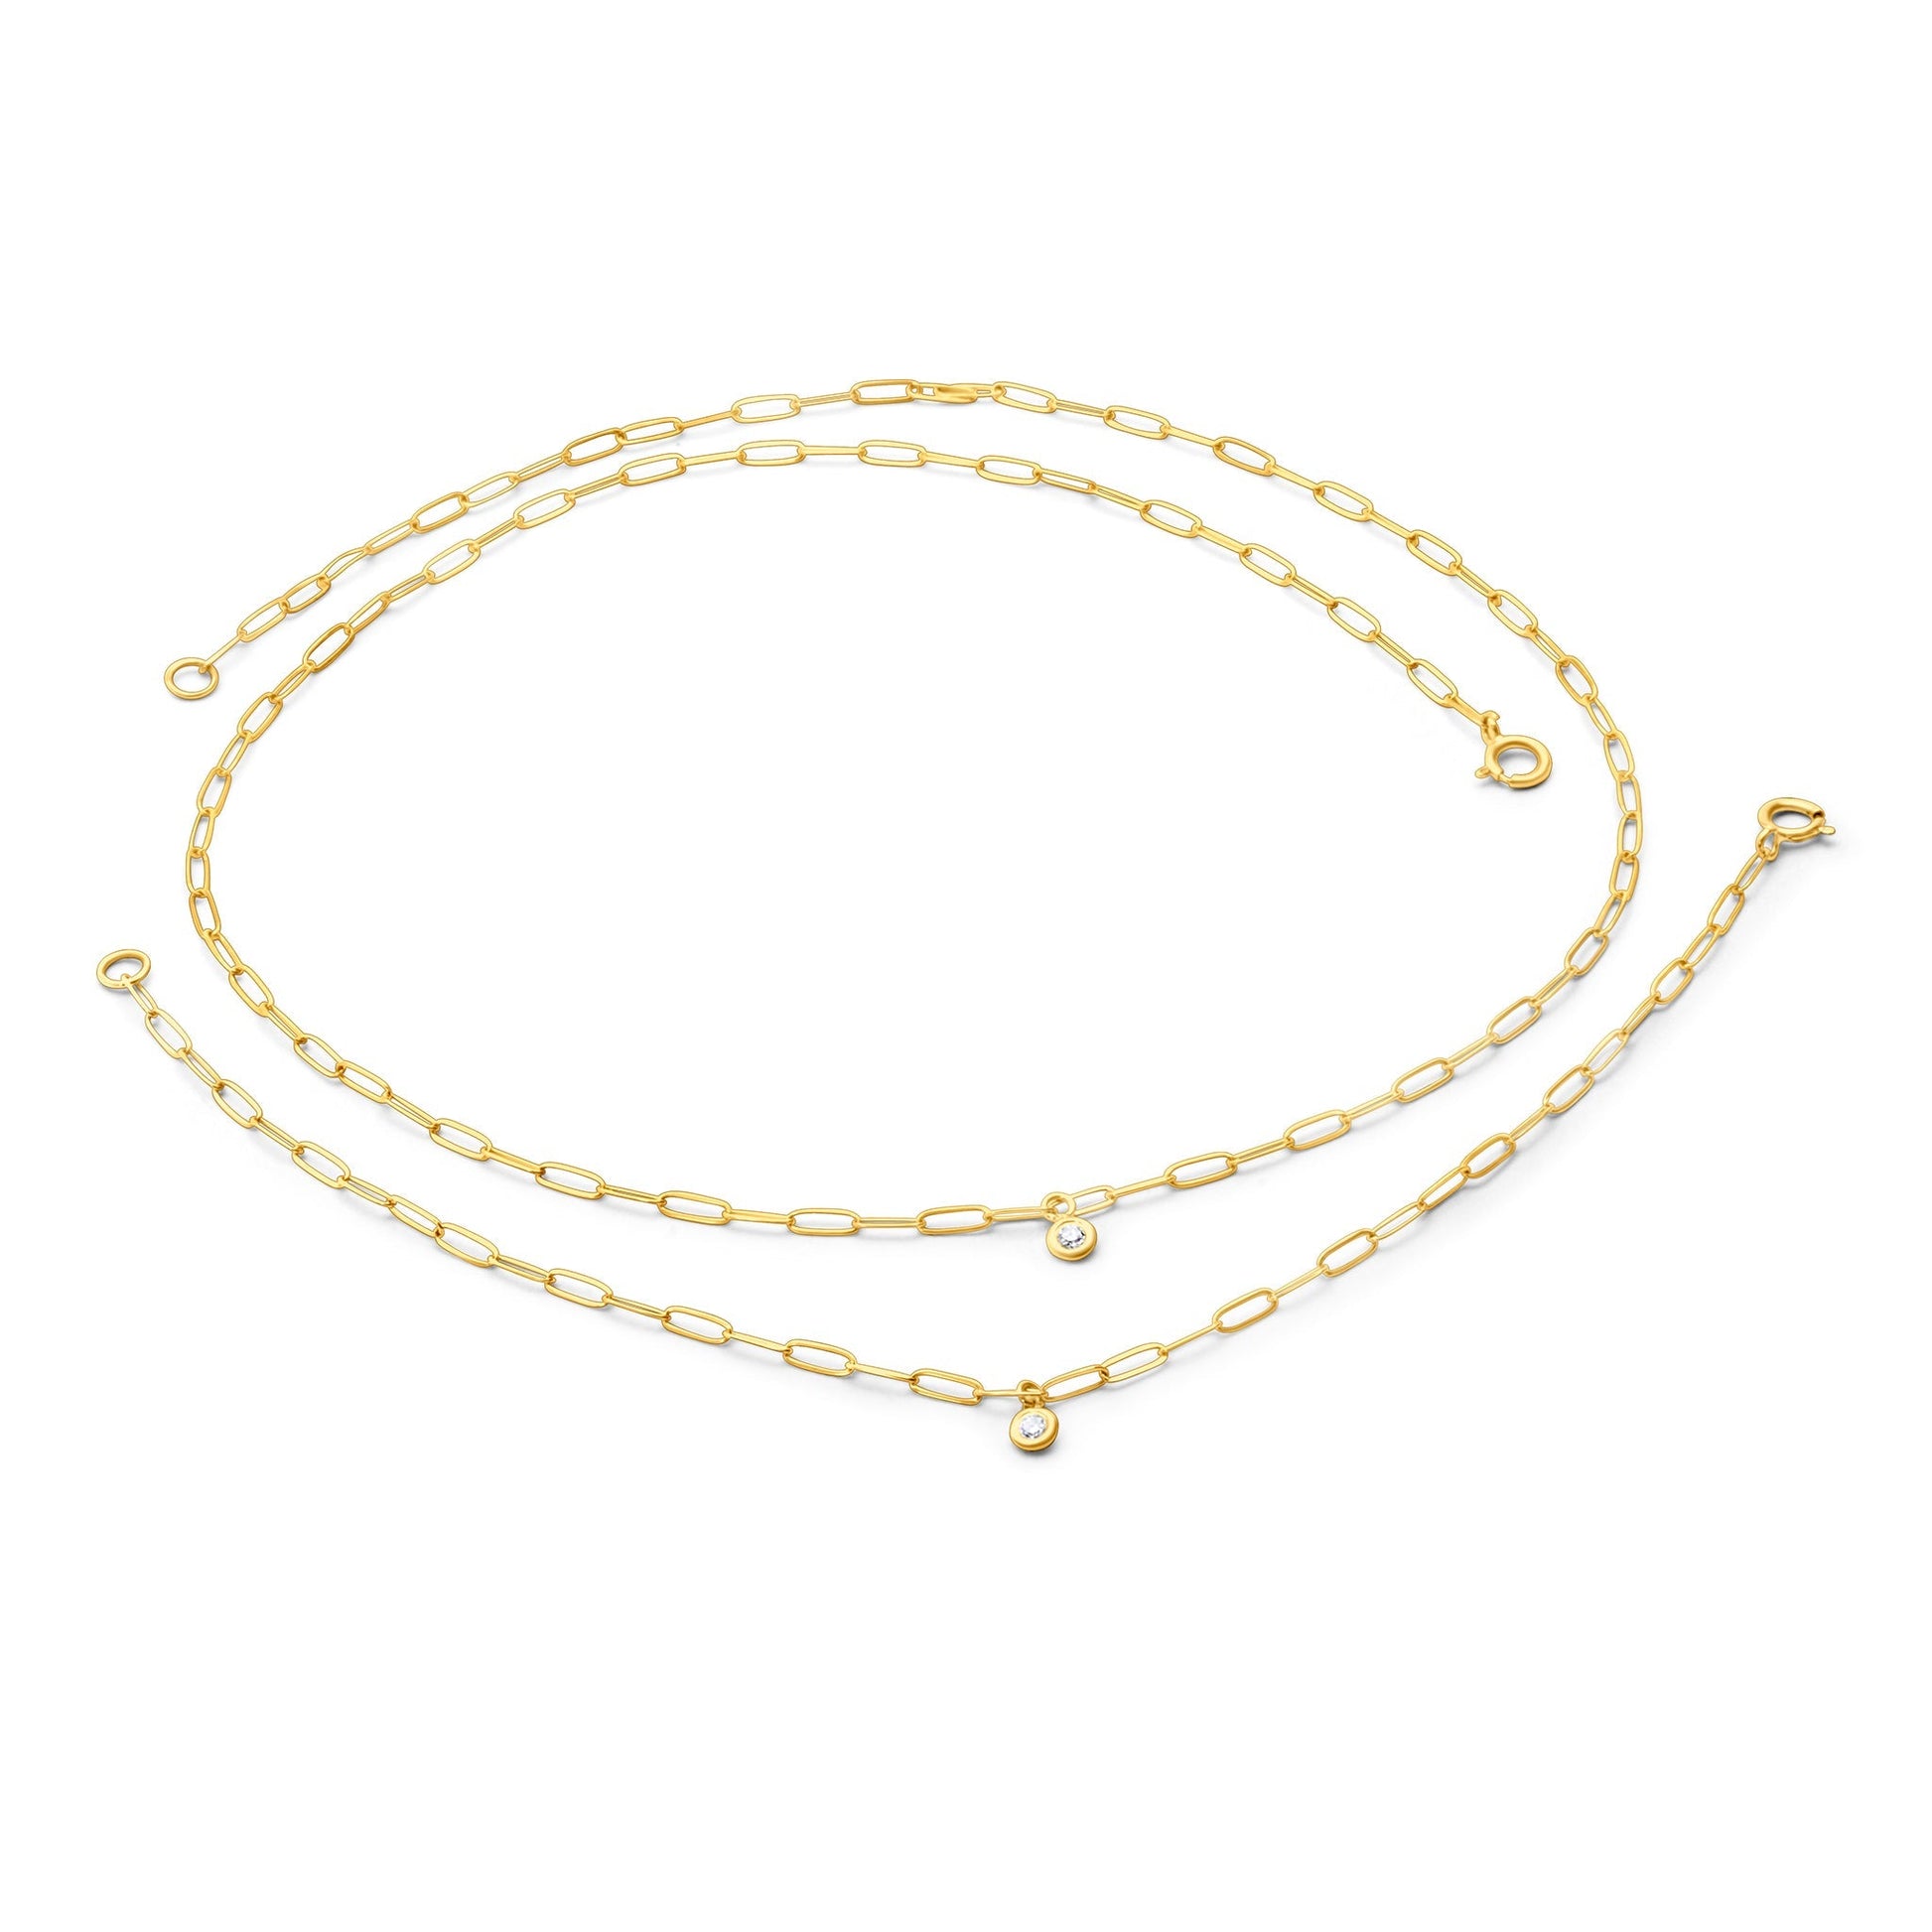 Gold Paperclip Chain Link Necklace with Diamond Pendant